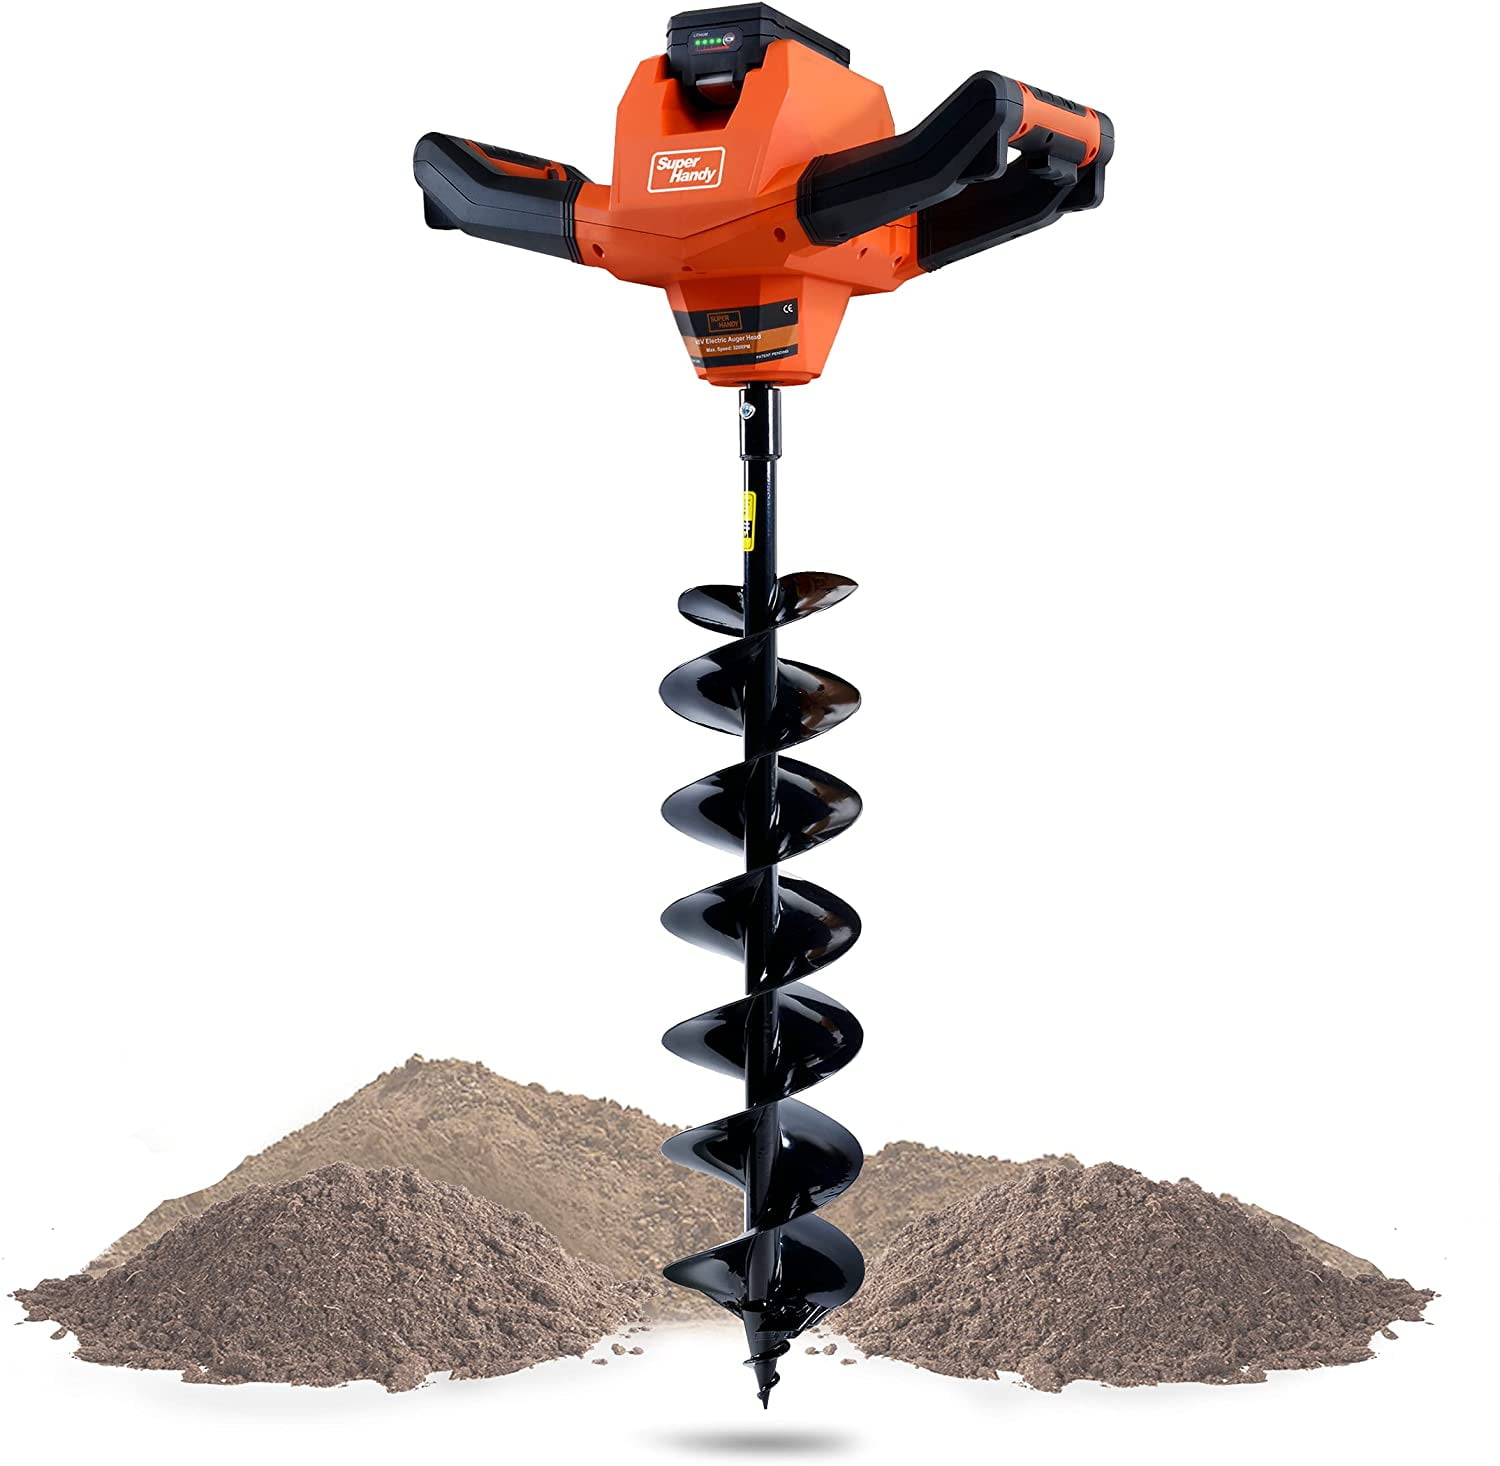 Earth Auger 52cc 2.3HP Gas Powered Post Hole Digger Gas Auger Bit Heavy Duty Electric Borer Fence Ground Drill for Earth Burrowing Drilling Post Hole Digging w/3 Drills 52cc 